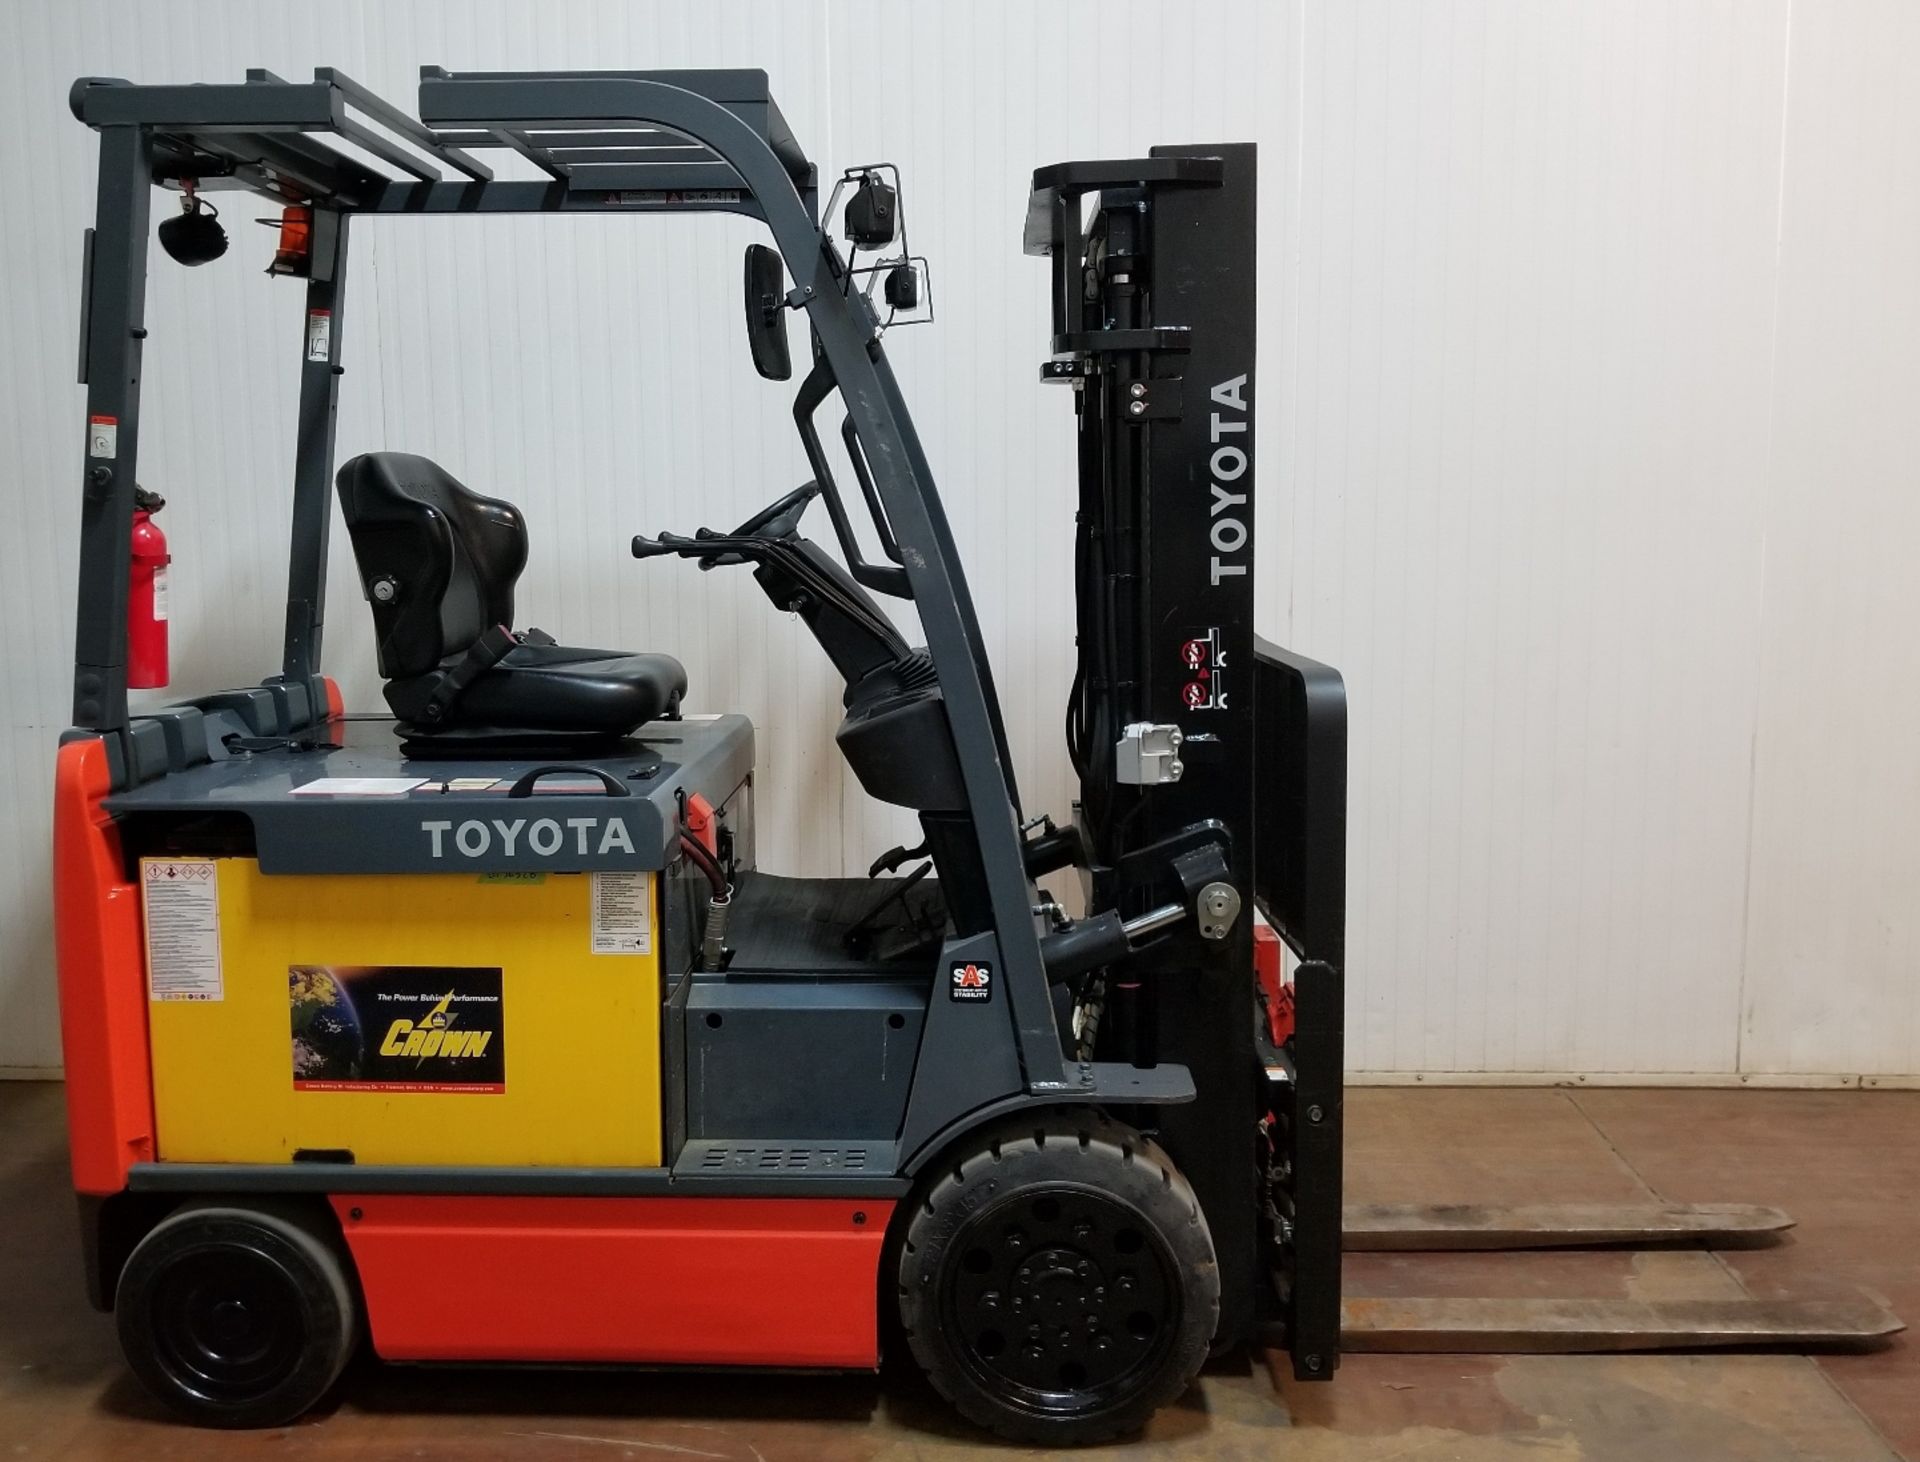 TOYOTA (2015) 8FBCU30 6,000 LB. 36V ELECTRIC FORKLIFT WITH 131" MAX. LIFT HEIGHT, SIDE SHIFT,